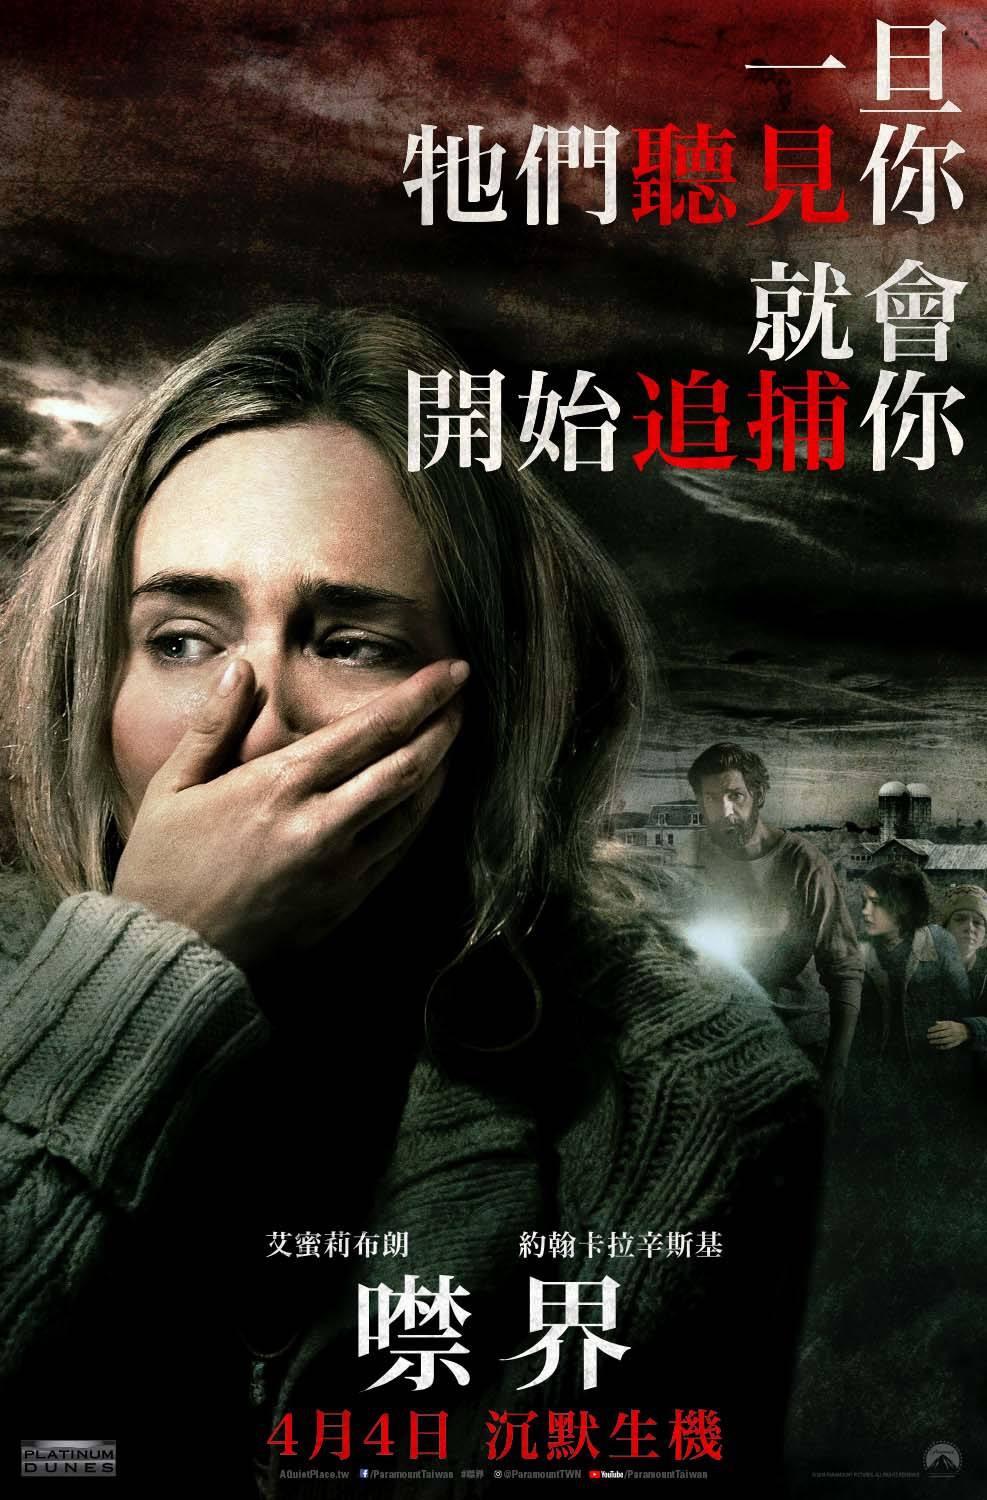 Extra Large Movie Poster Image for A Quiet Place (#4 of 4)